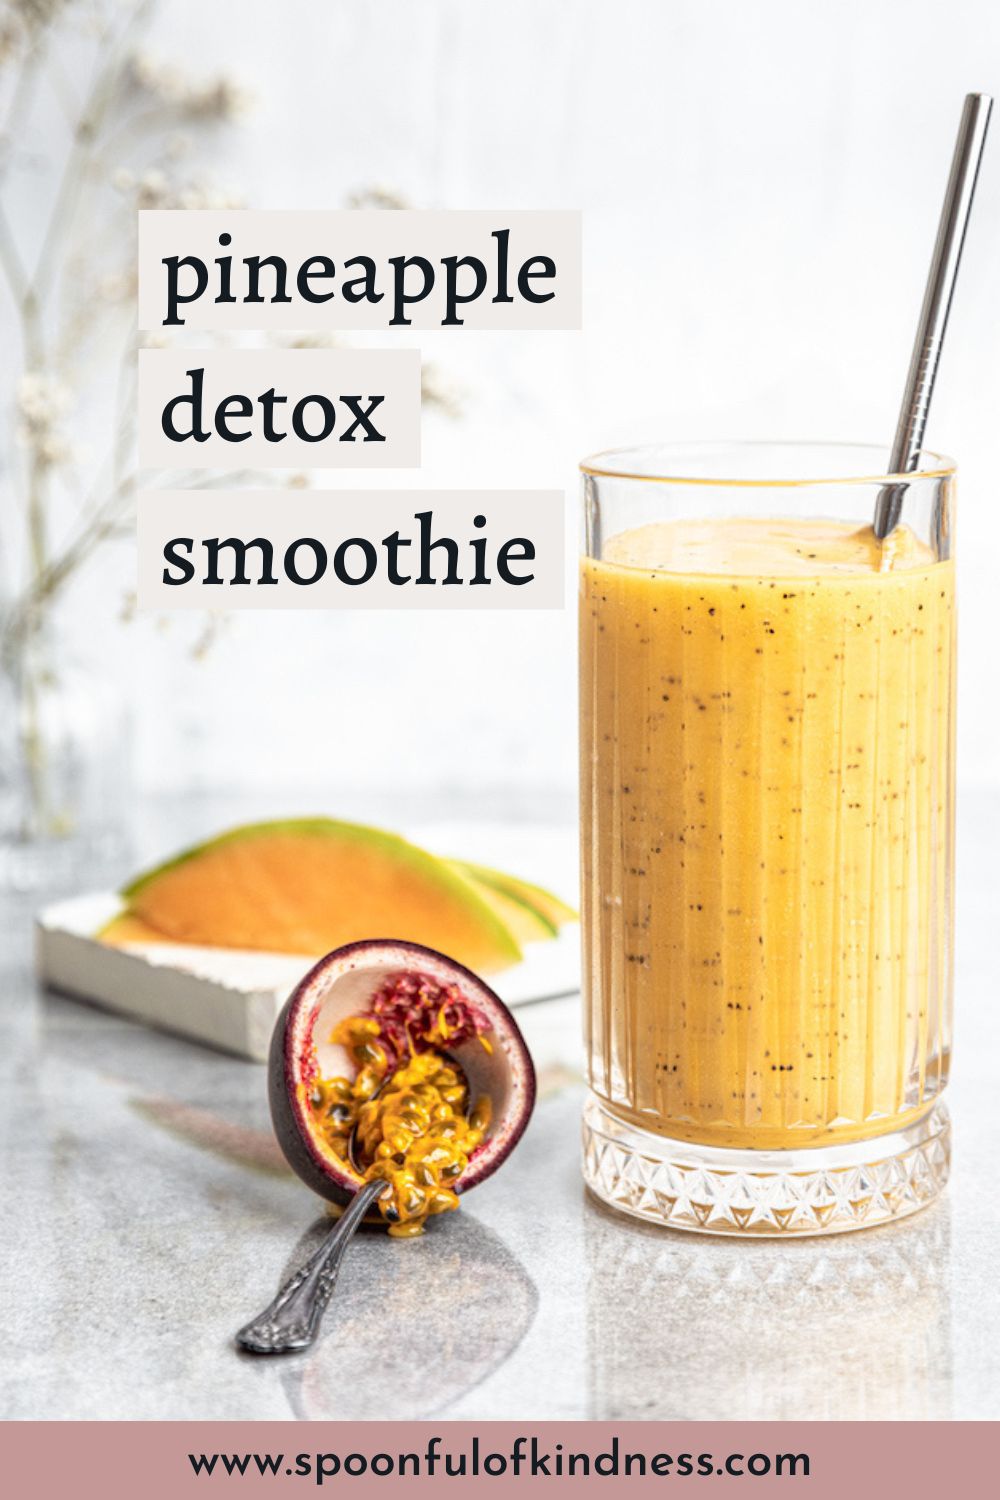 Pineapple Detox Smoothie Recipe - Spoonful of Kindness